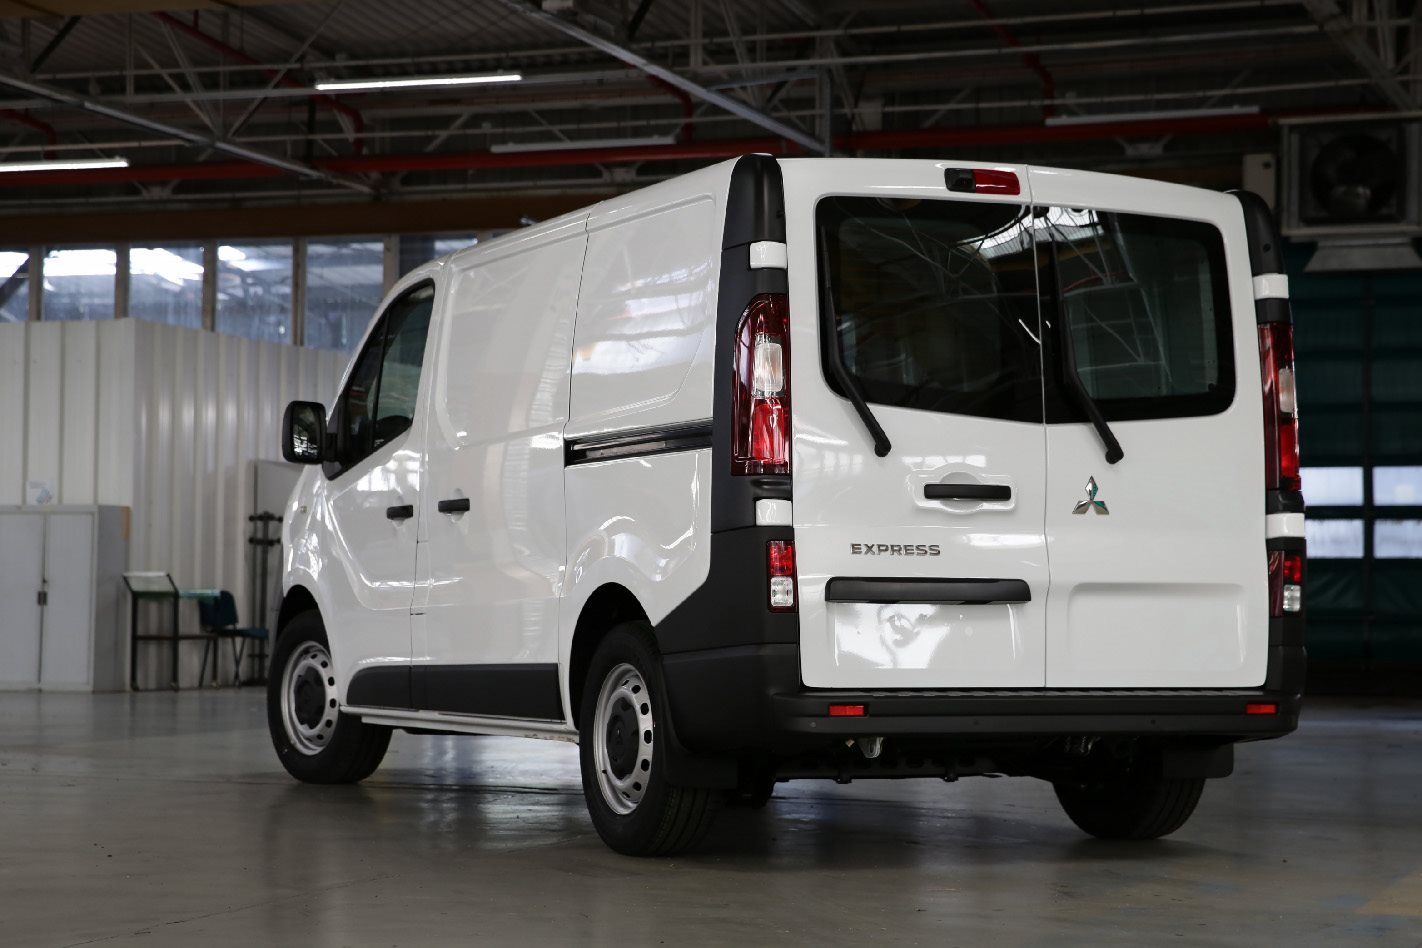 Mitsubishi Express pricing and features